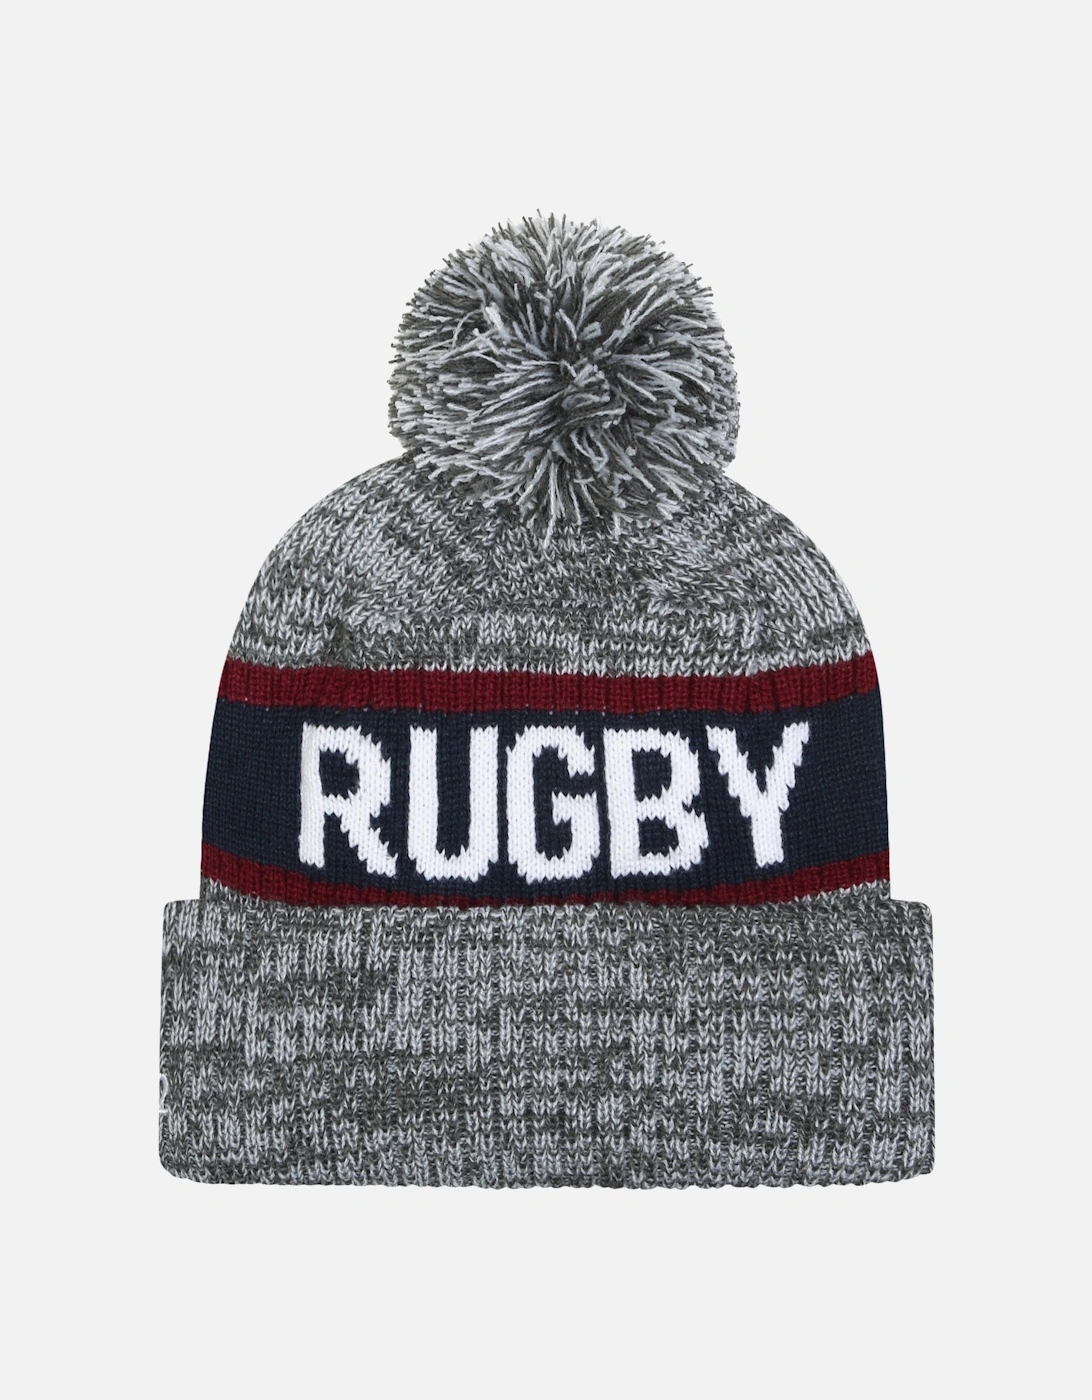 Unisex Adult 23/24 England Rugby Bobble Beanie